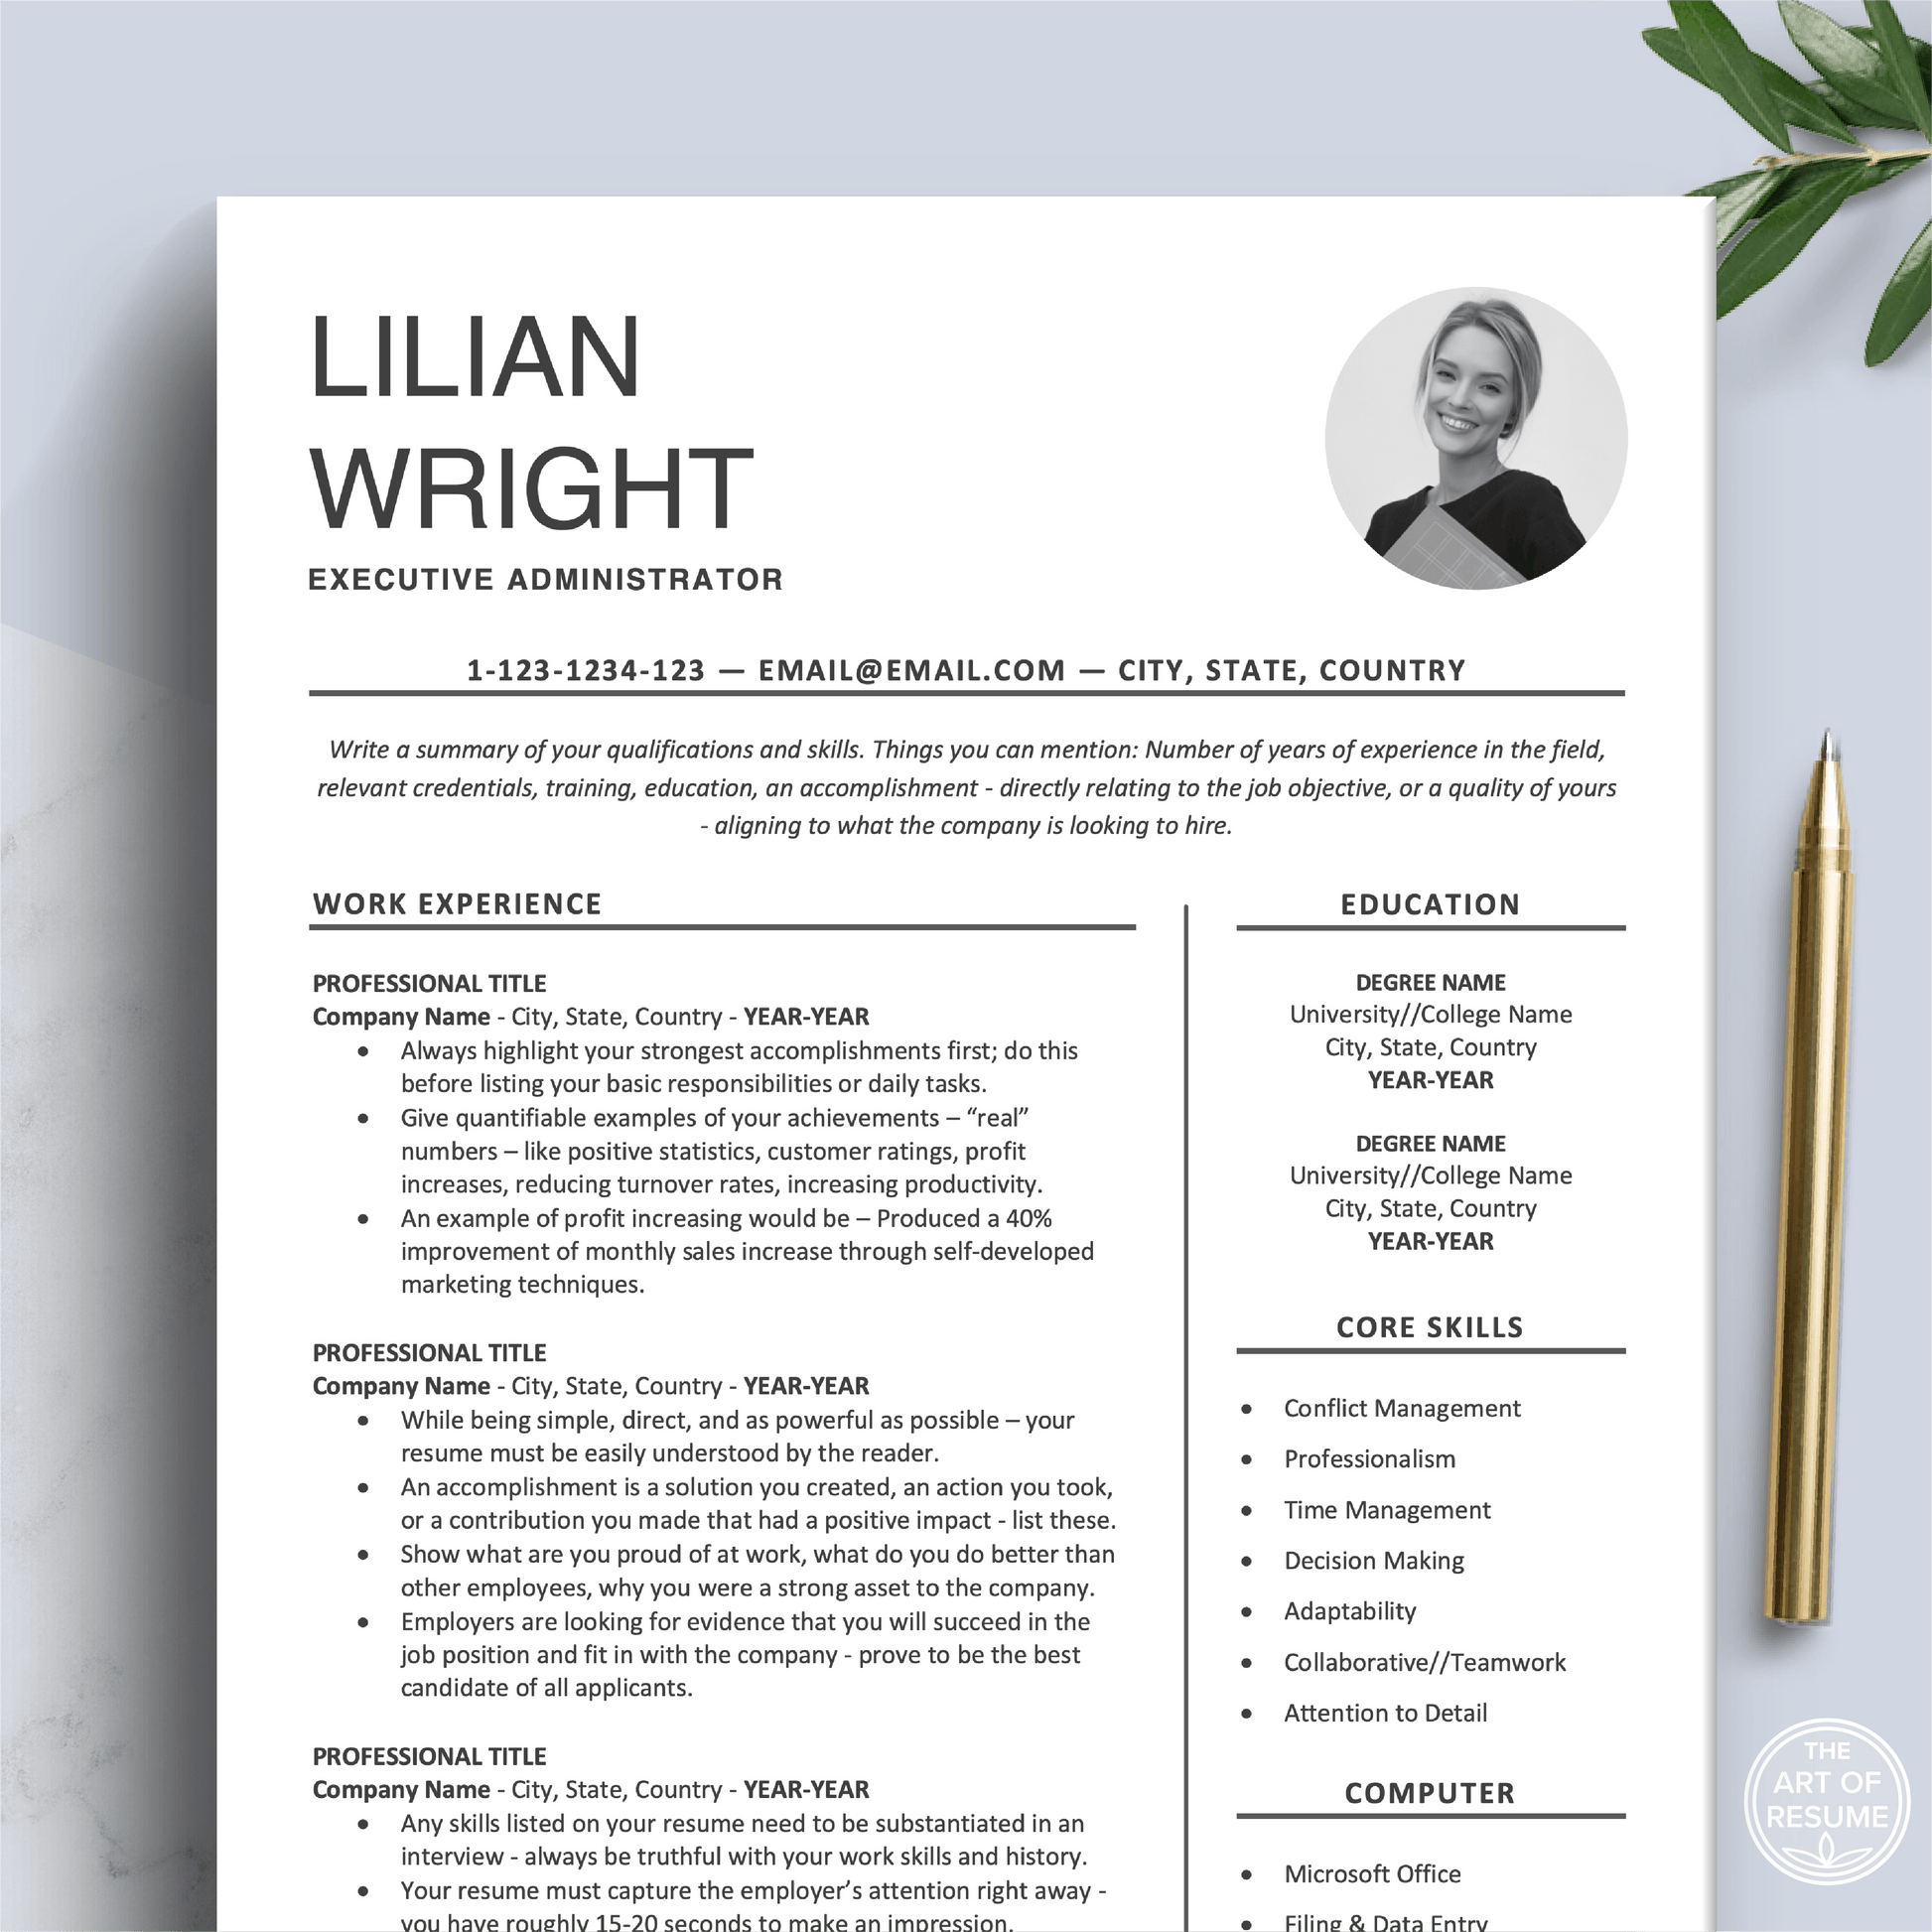 Professional Resume with Photo | Modern Resume with Profile Picture - The Art of Resume